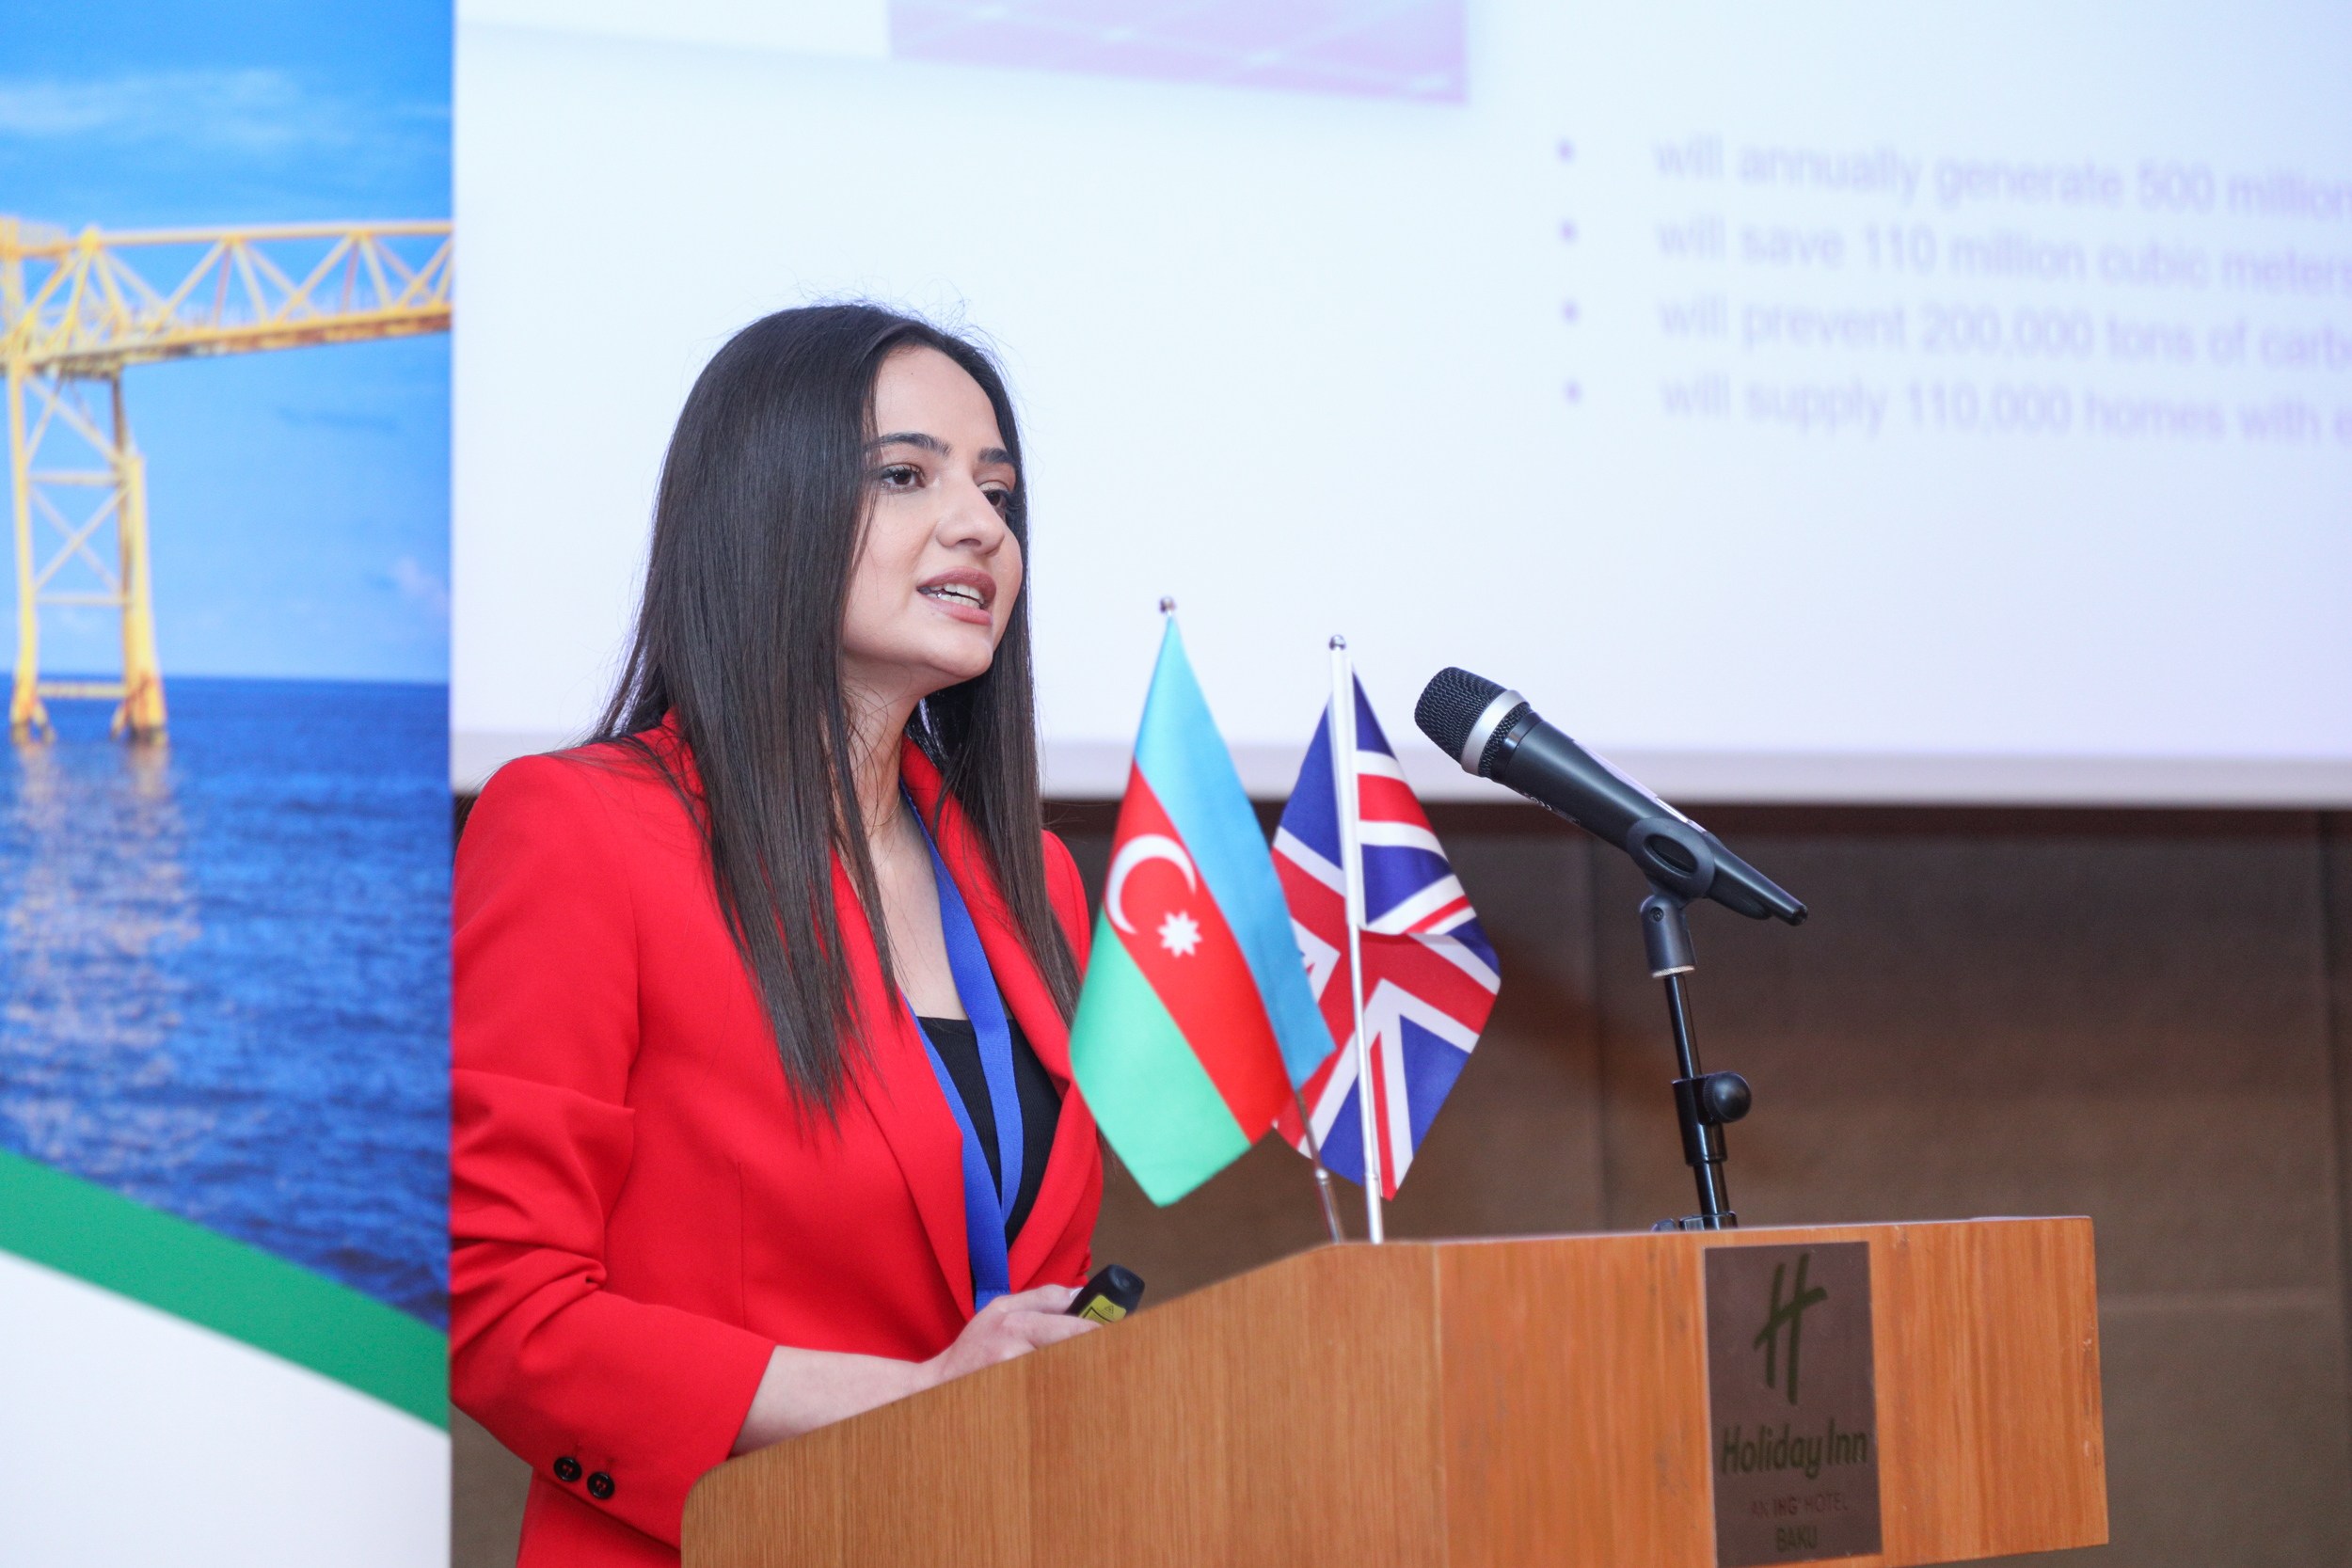  Deputy director of AREA participated in the "Baku Connect" event